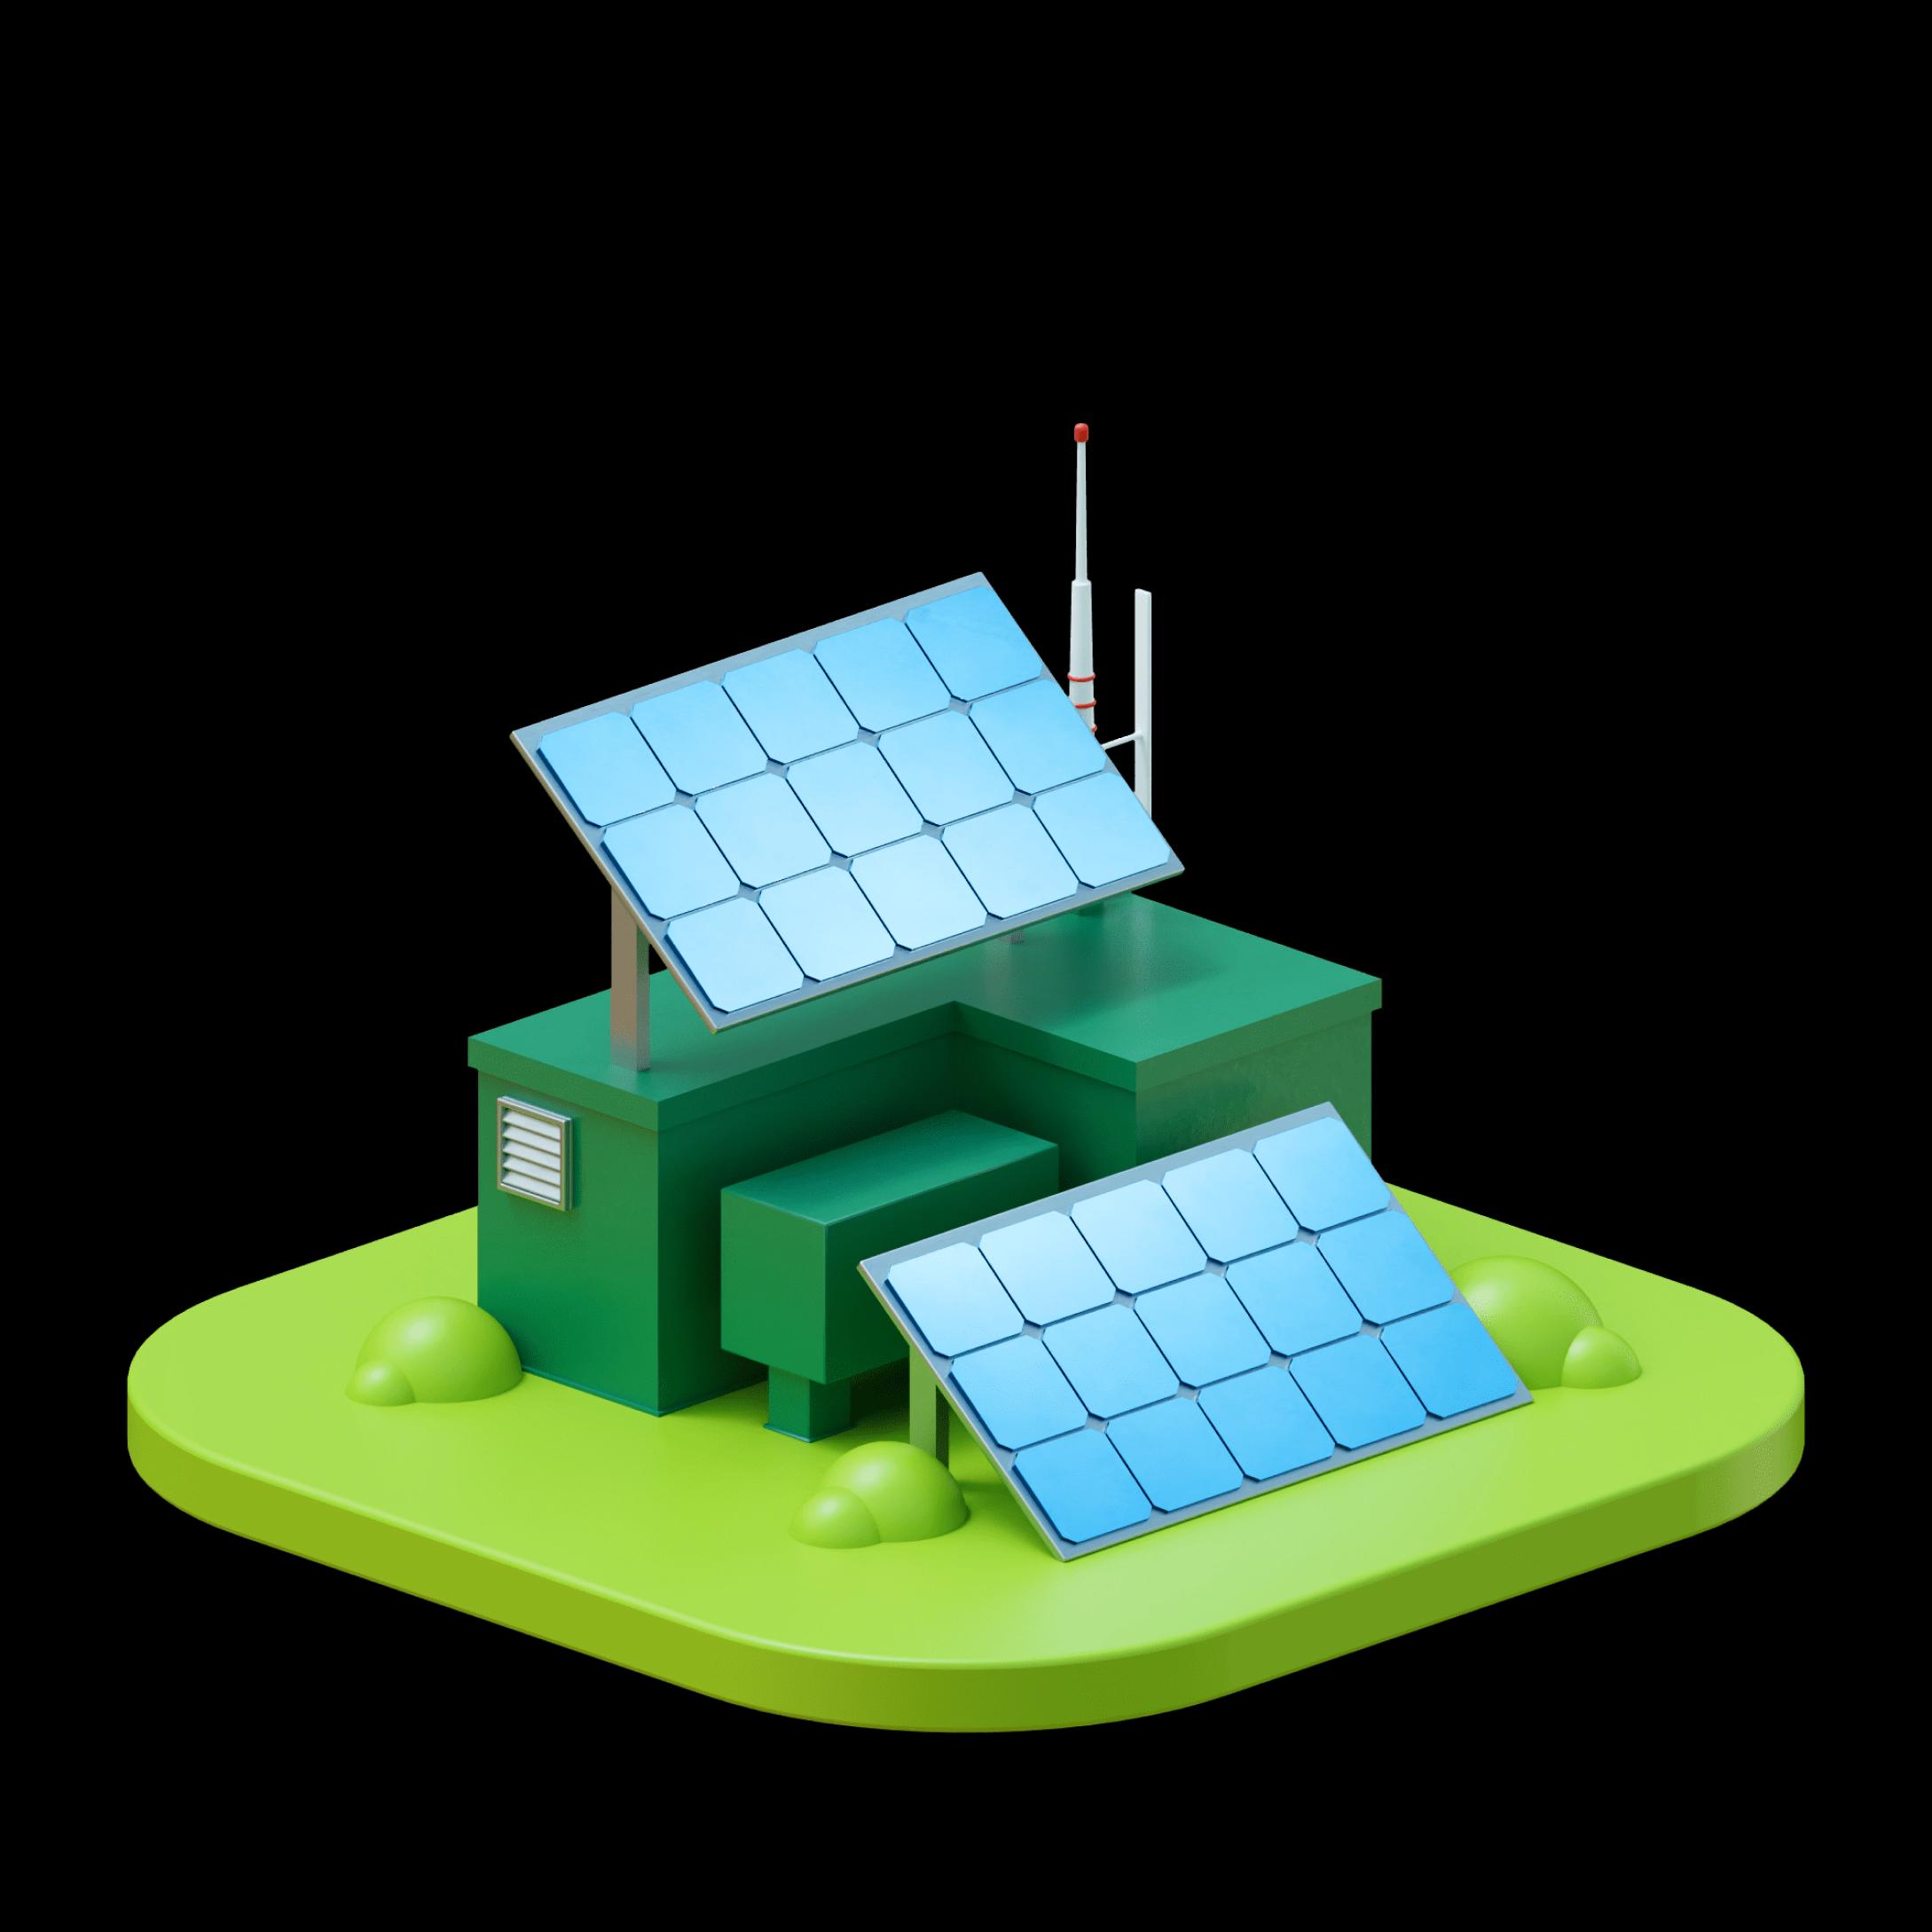 A small 3d model of a building with solar panels on top of it